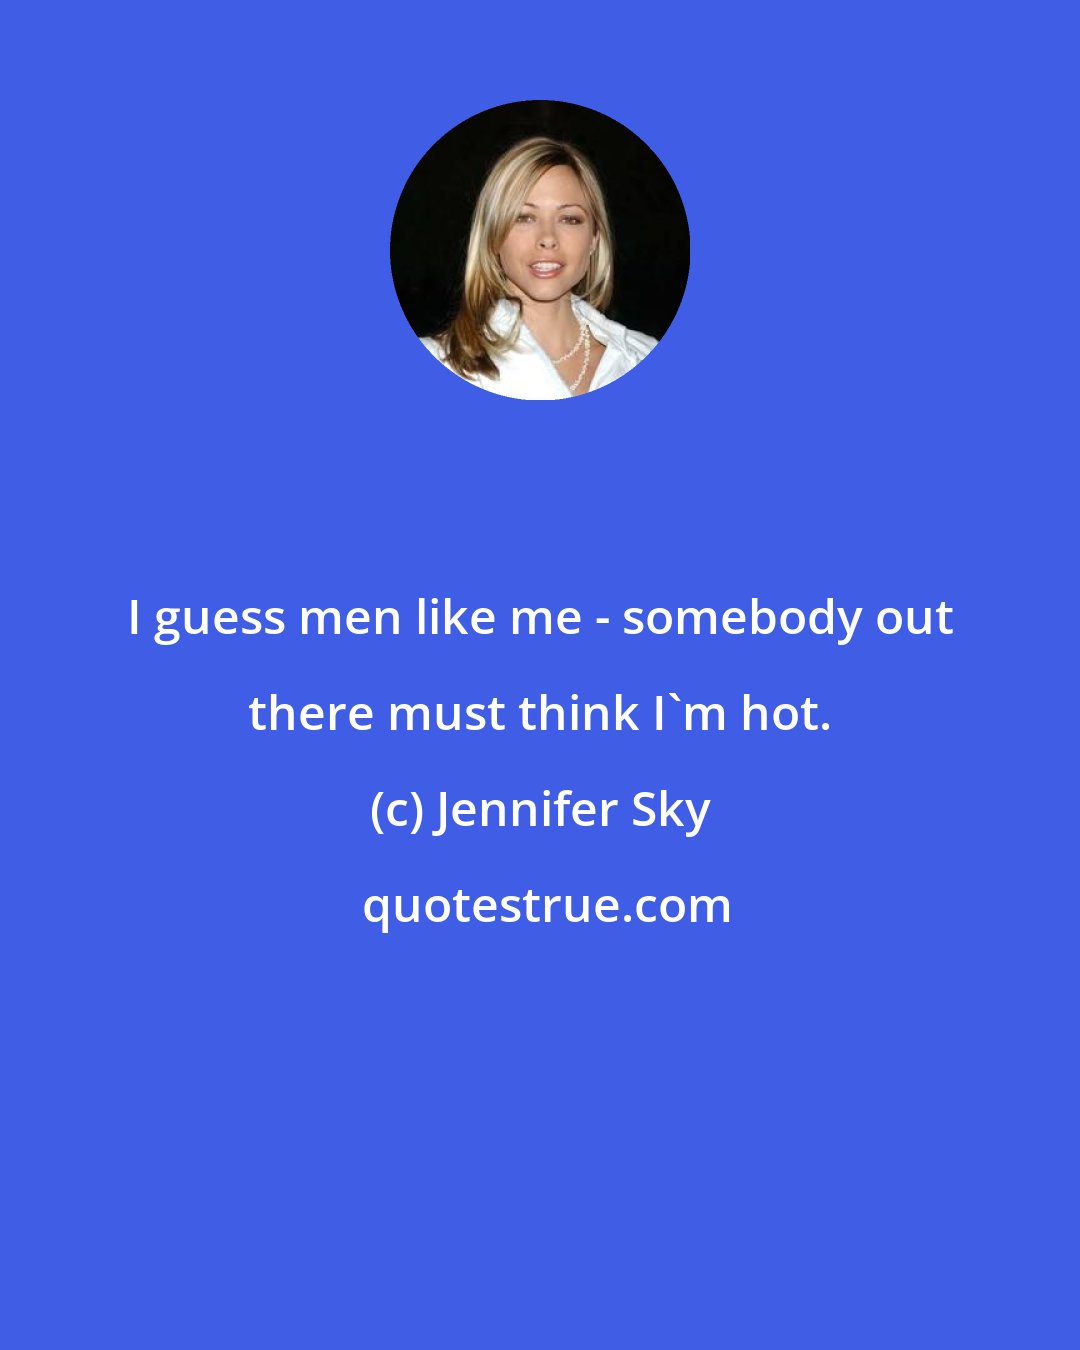 Jennifer Sky: I guess men like me - somebody out there must think I'm hot.